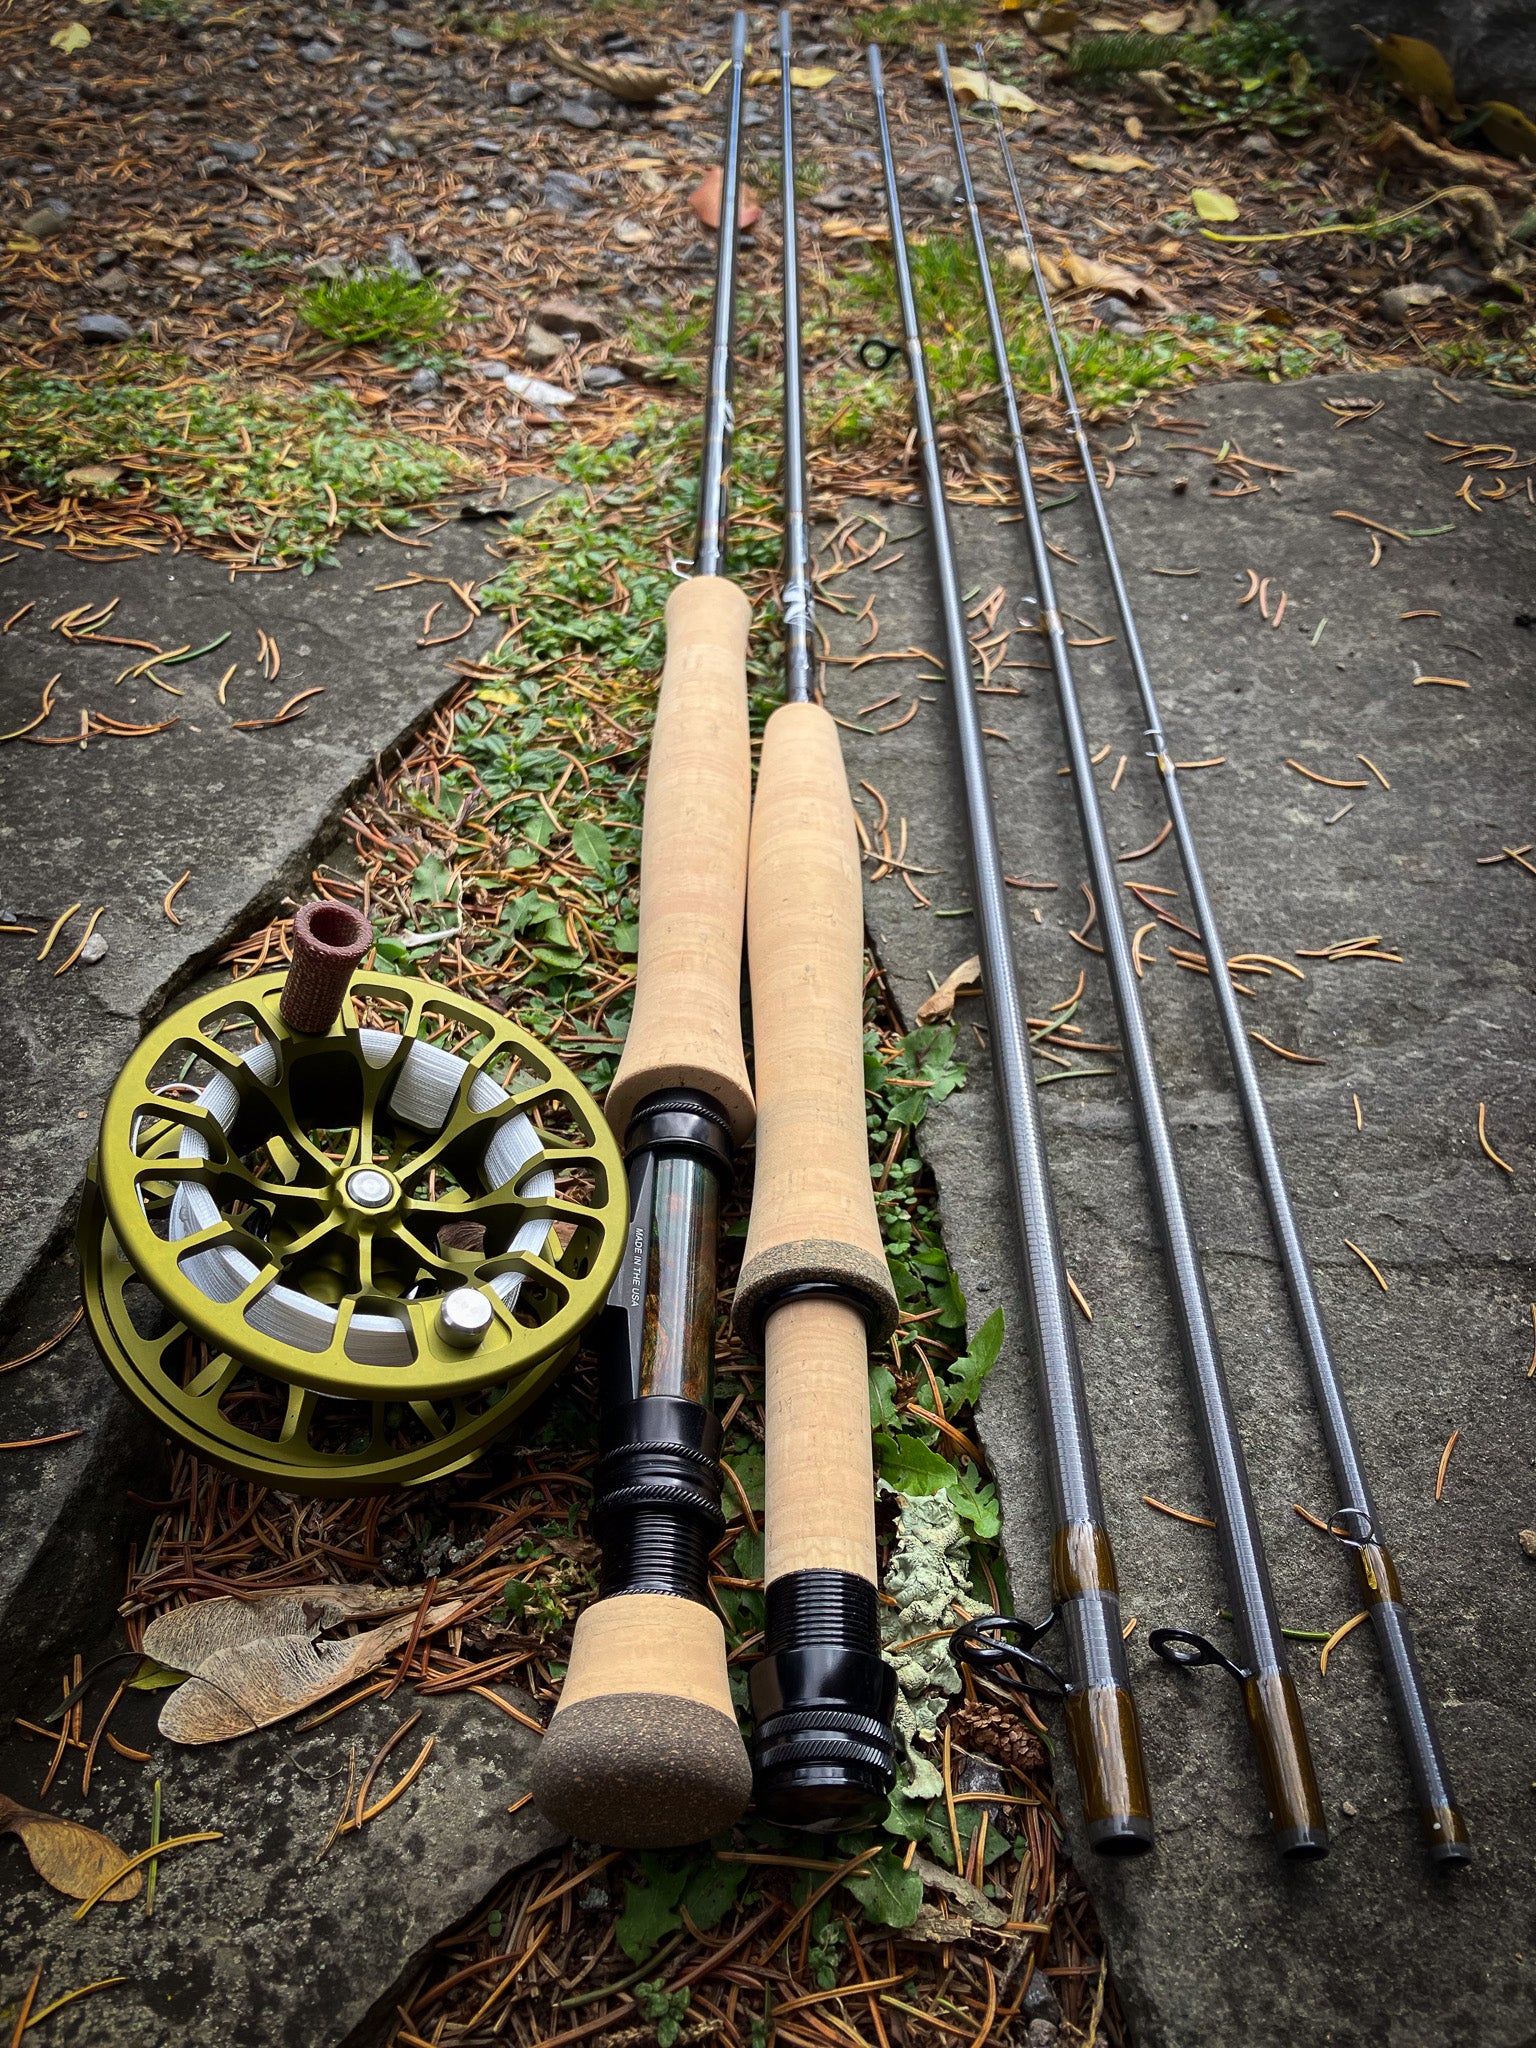 These are the 3 BEST 3wt fly rods you can buy, FREE shipping